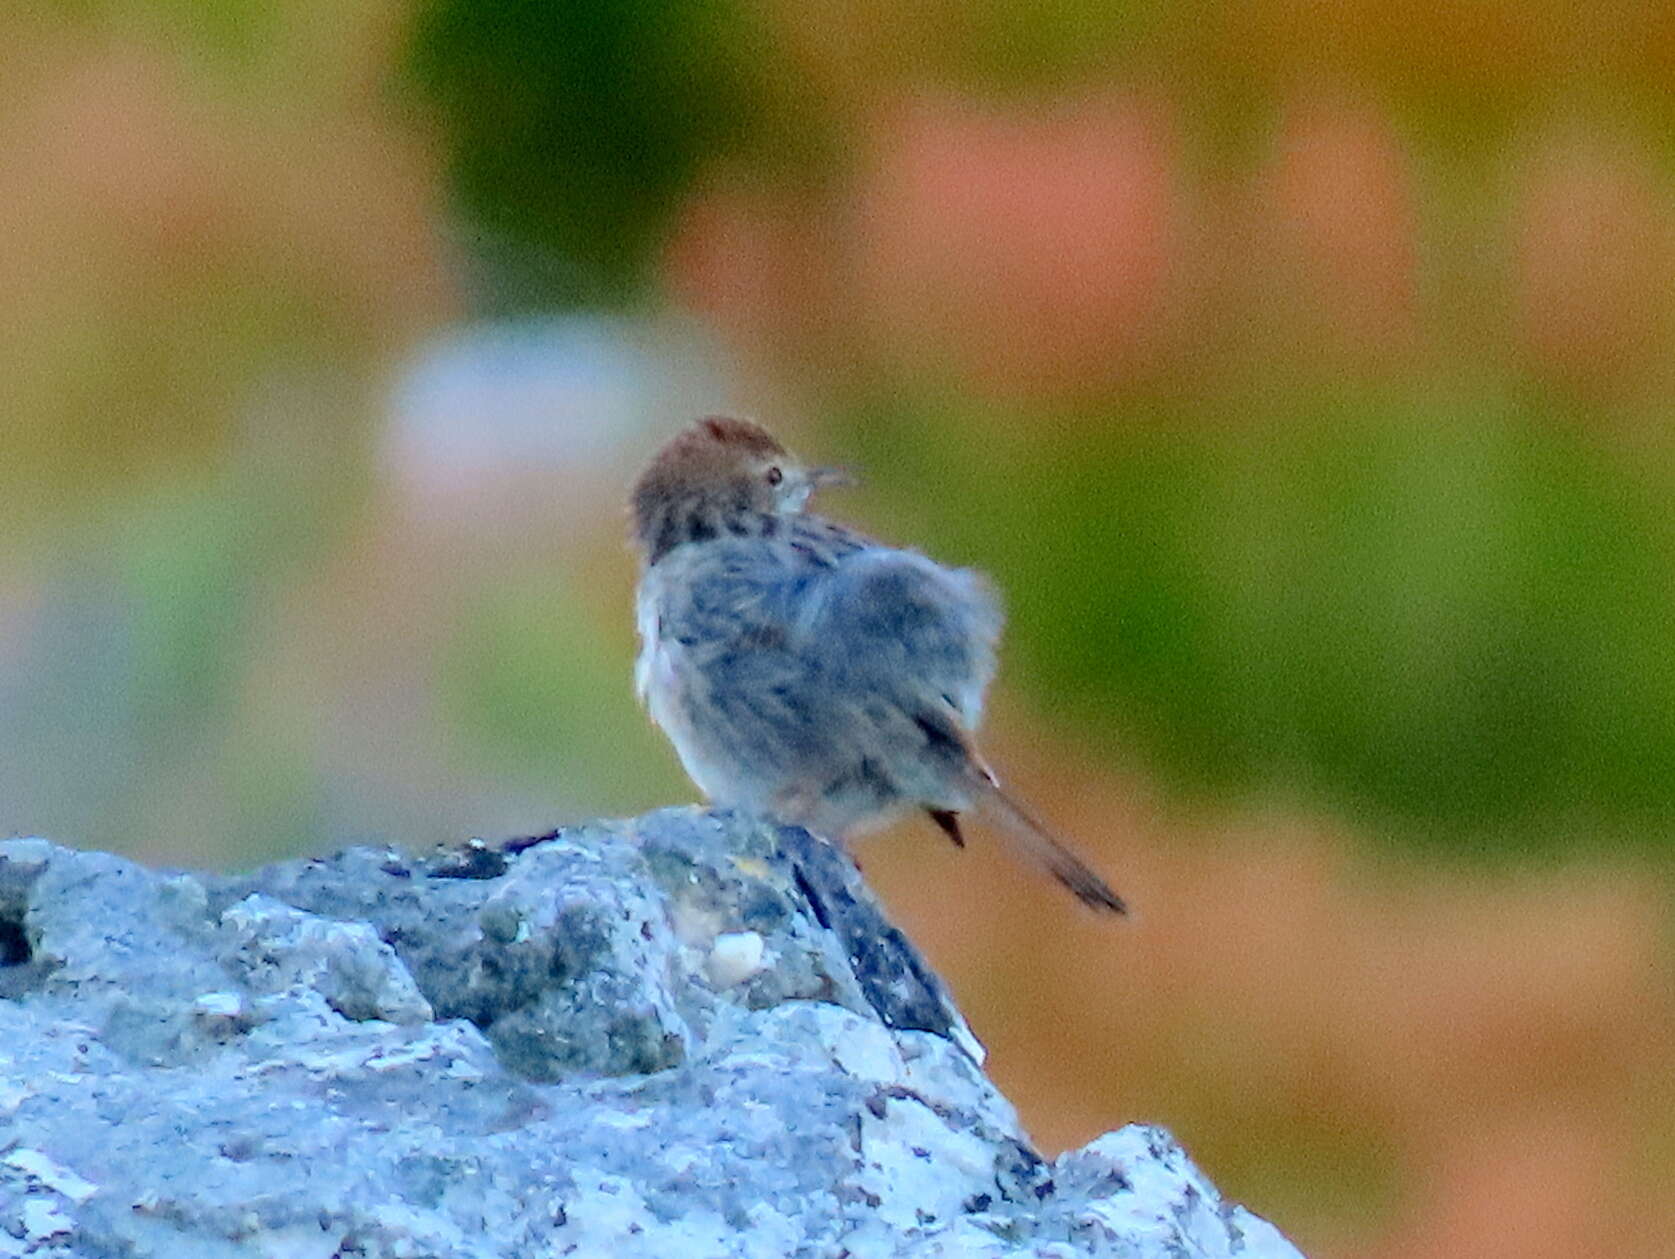 Image of Cisticola subruficapilla subruficapilla (Smith & A 1843)